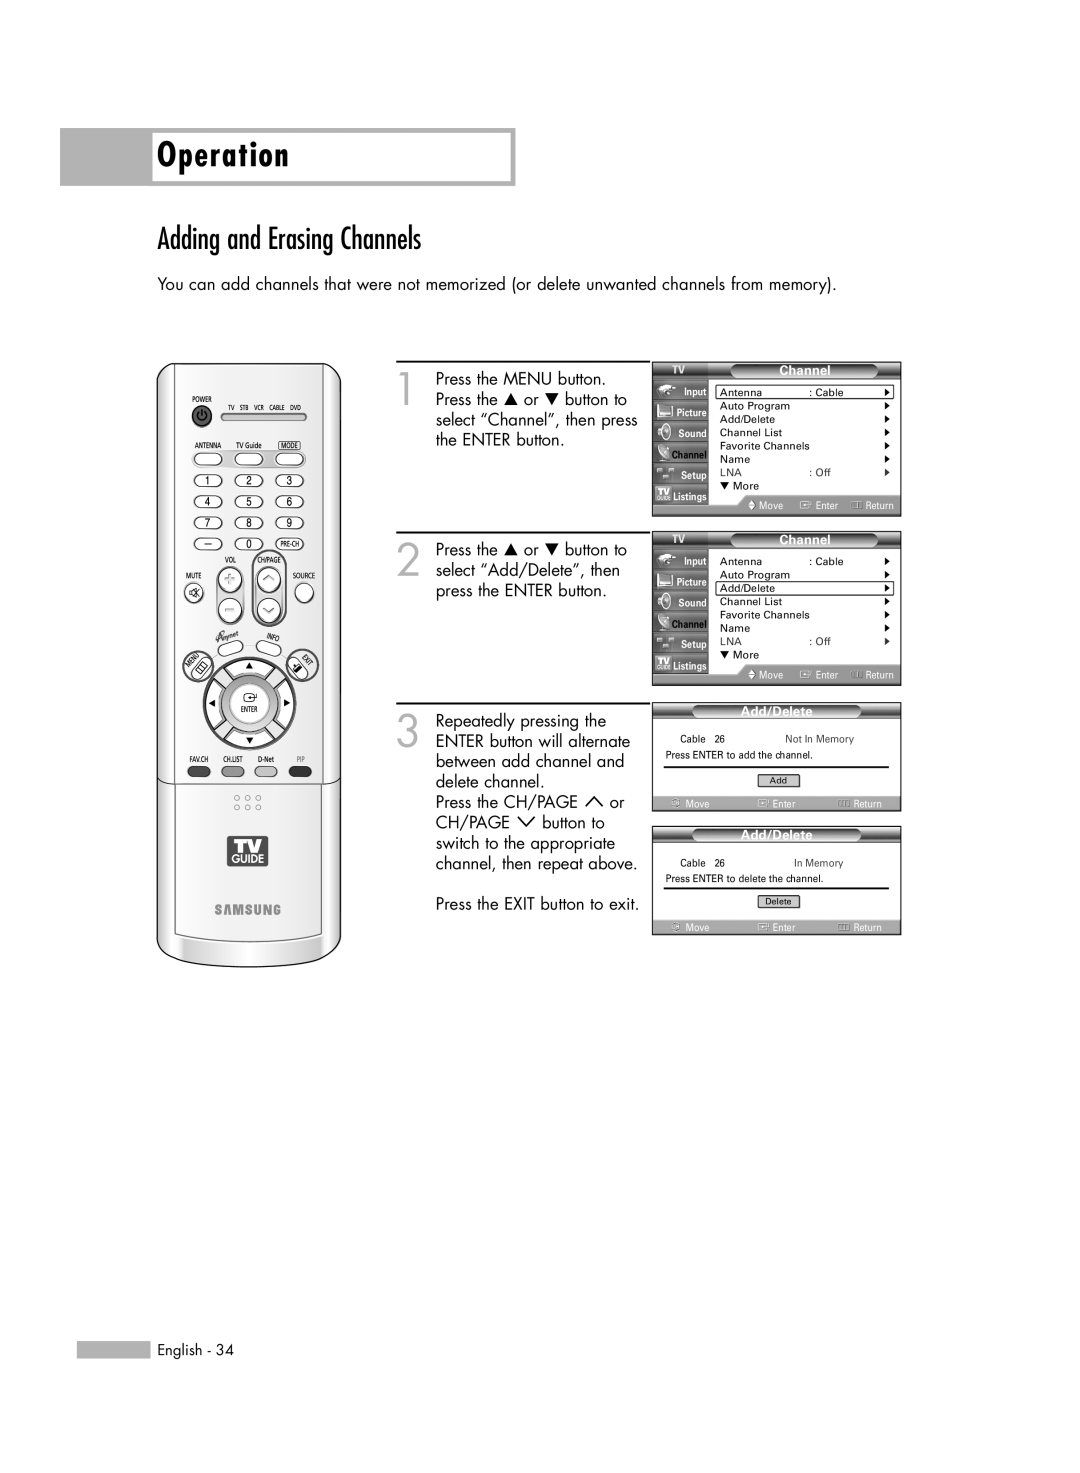 Samsung HL-R5688W manual Adding and Erasing Channels, Operation, Not In Memory 